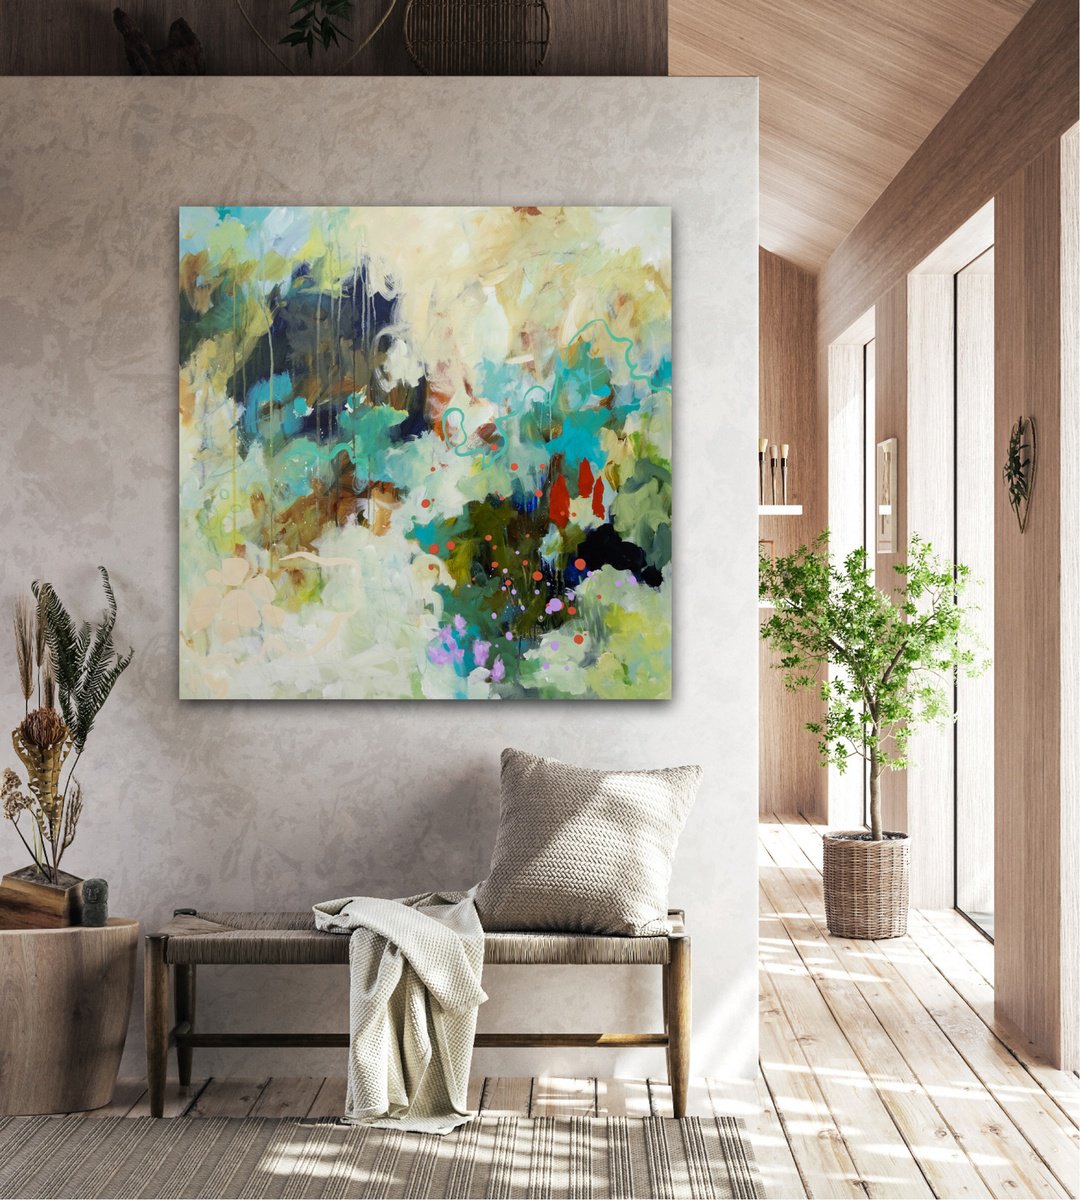 J’ai cueilli pour toi - Abstract landscape painting - Ready to hang by Chantal Proulx